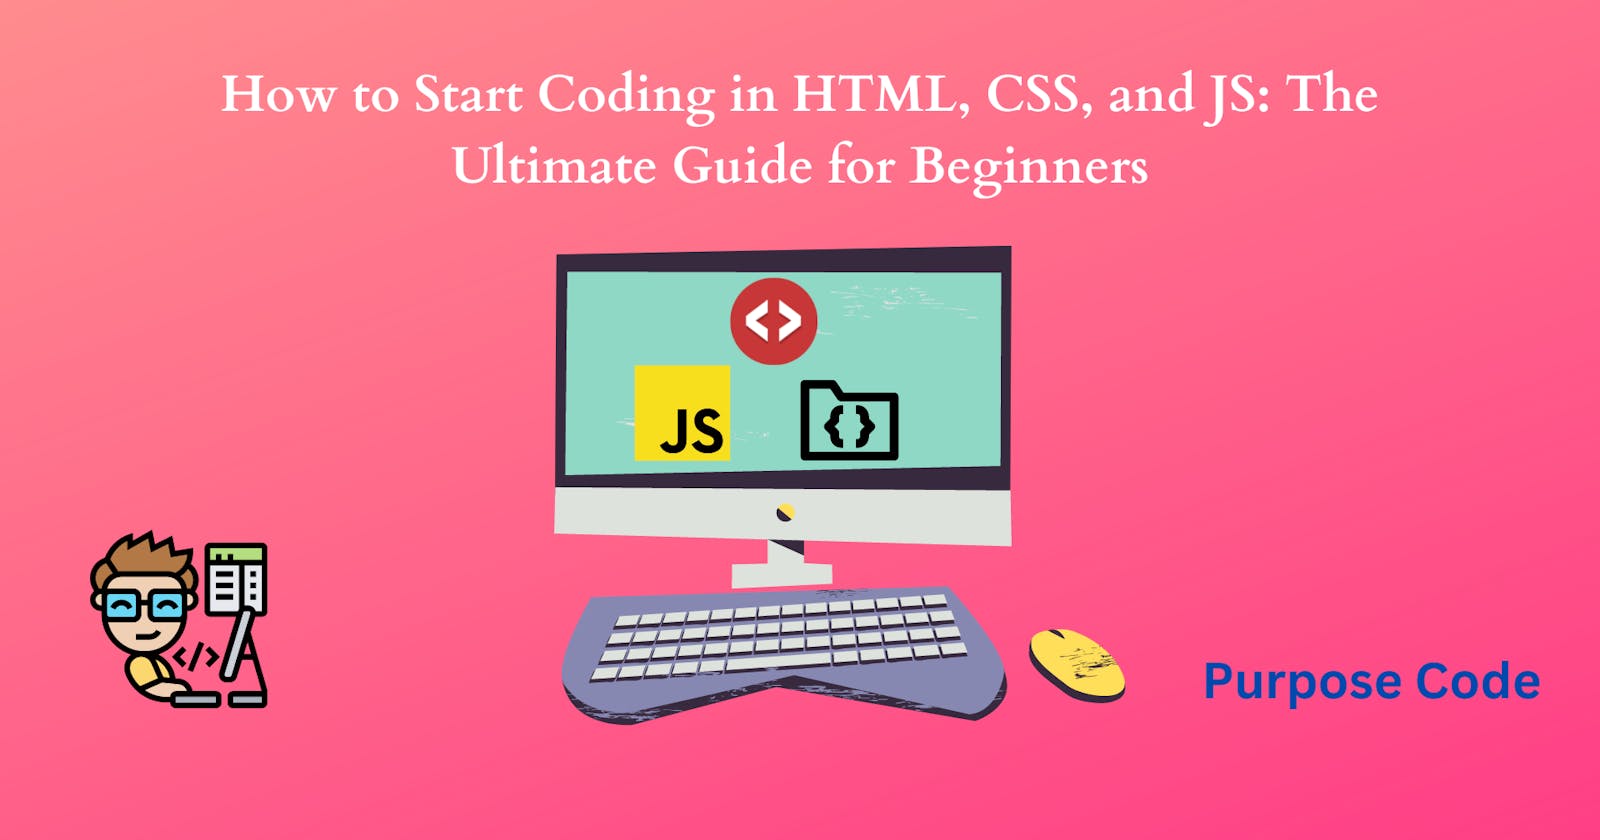 How to Start Coding in HTML, CSS, and JS: The Ultimate Guide for Beginners